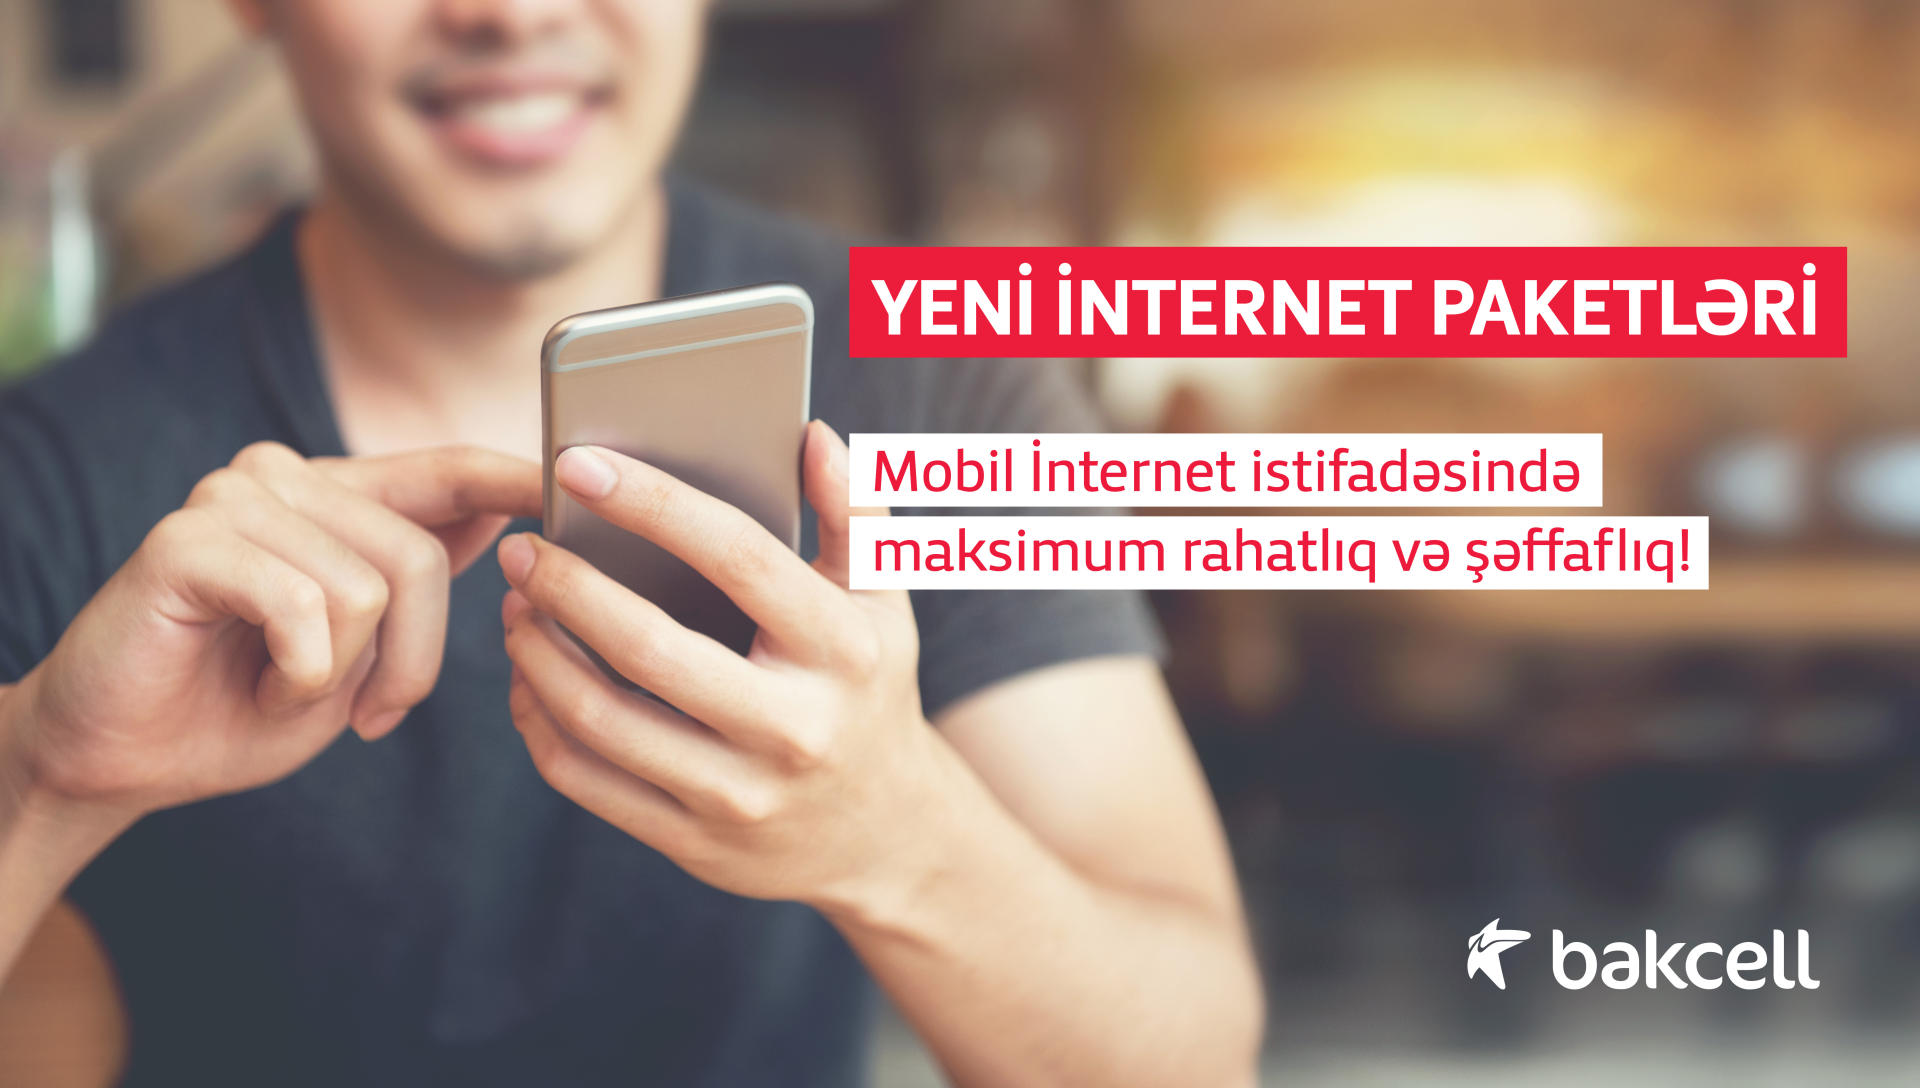 Bakcell introduced brand new internet packages